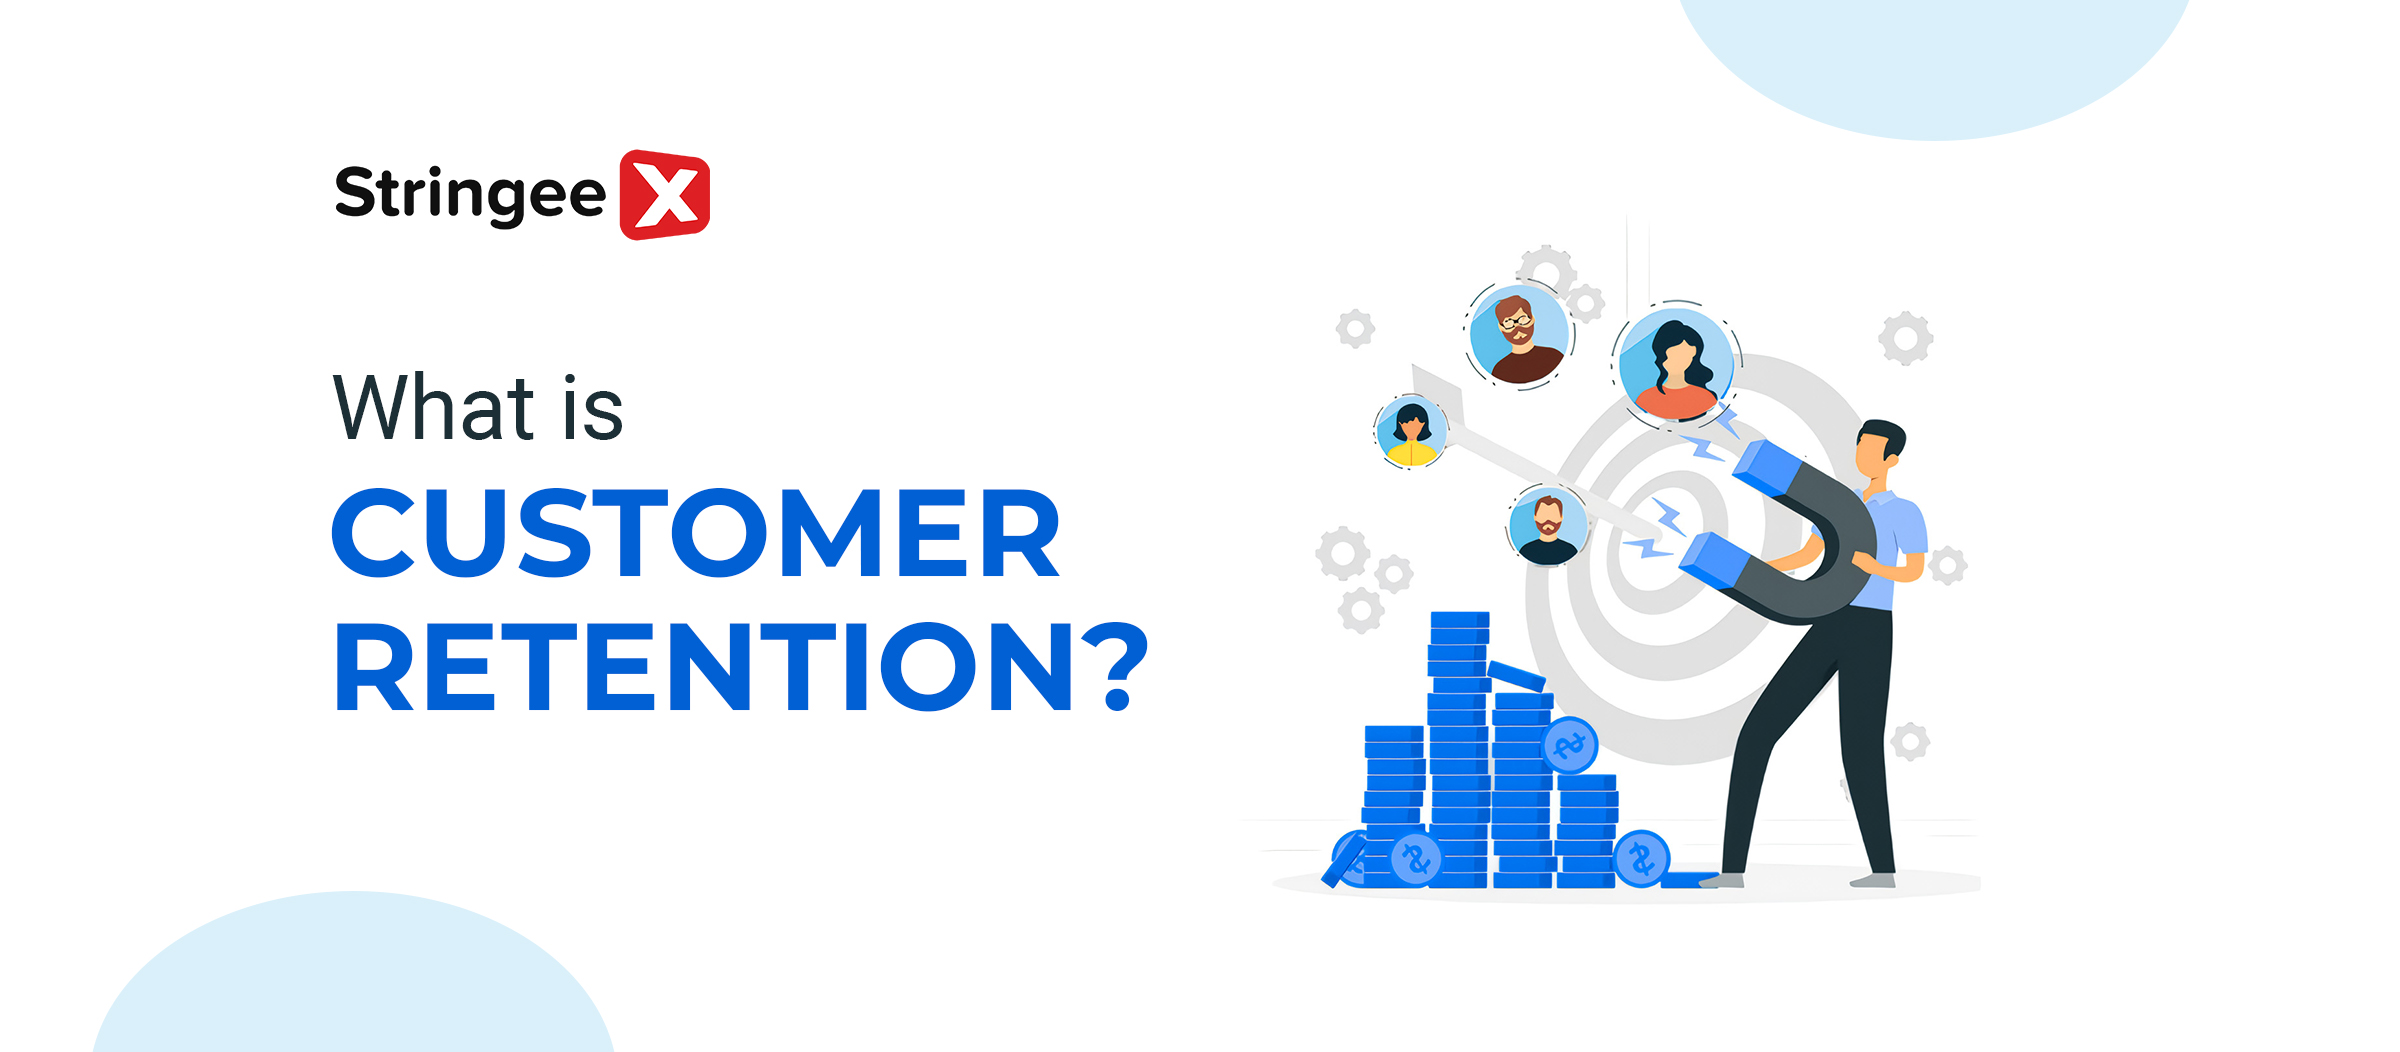 What Is Customer Retention? How Can It Be Improved?